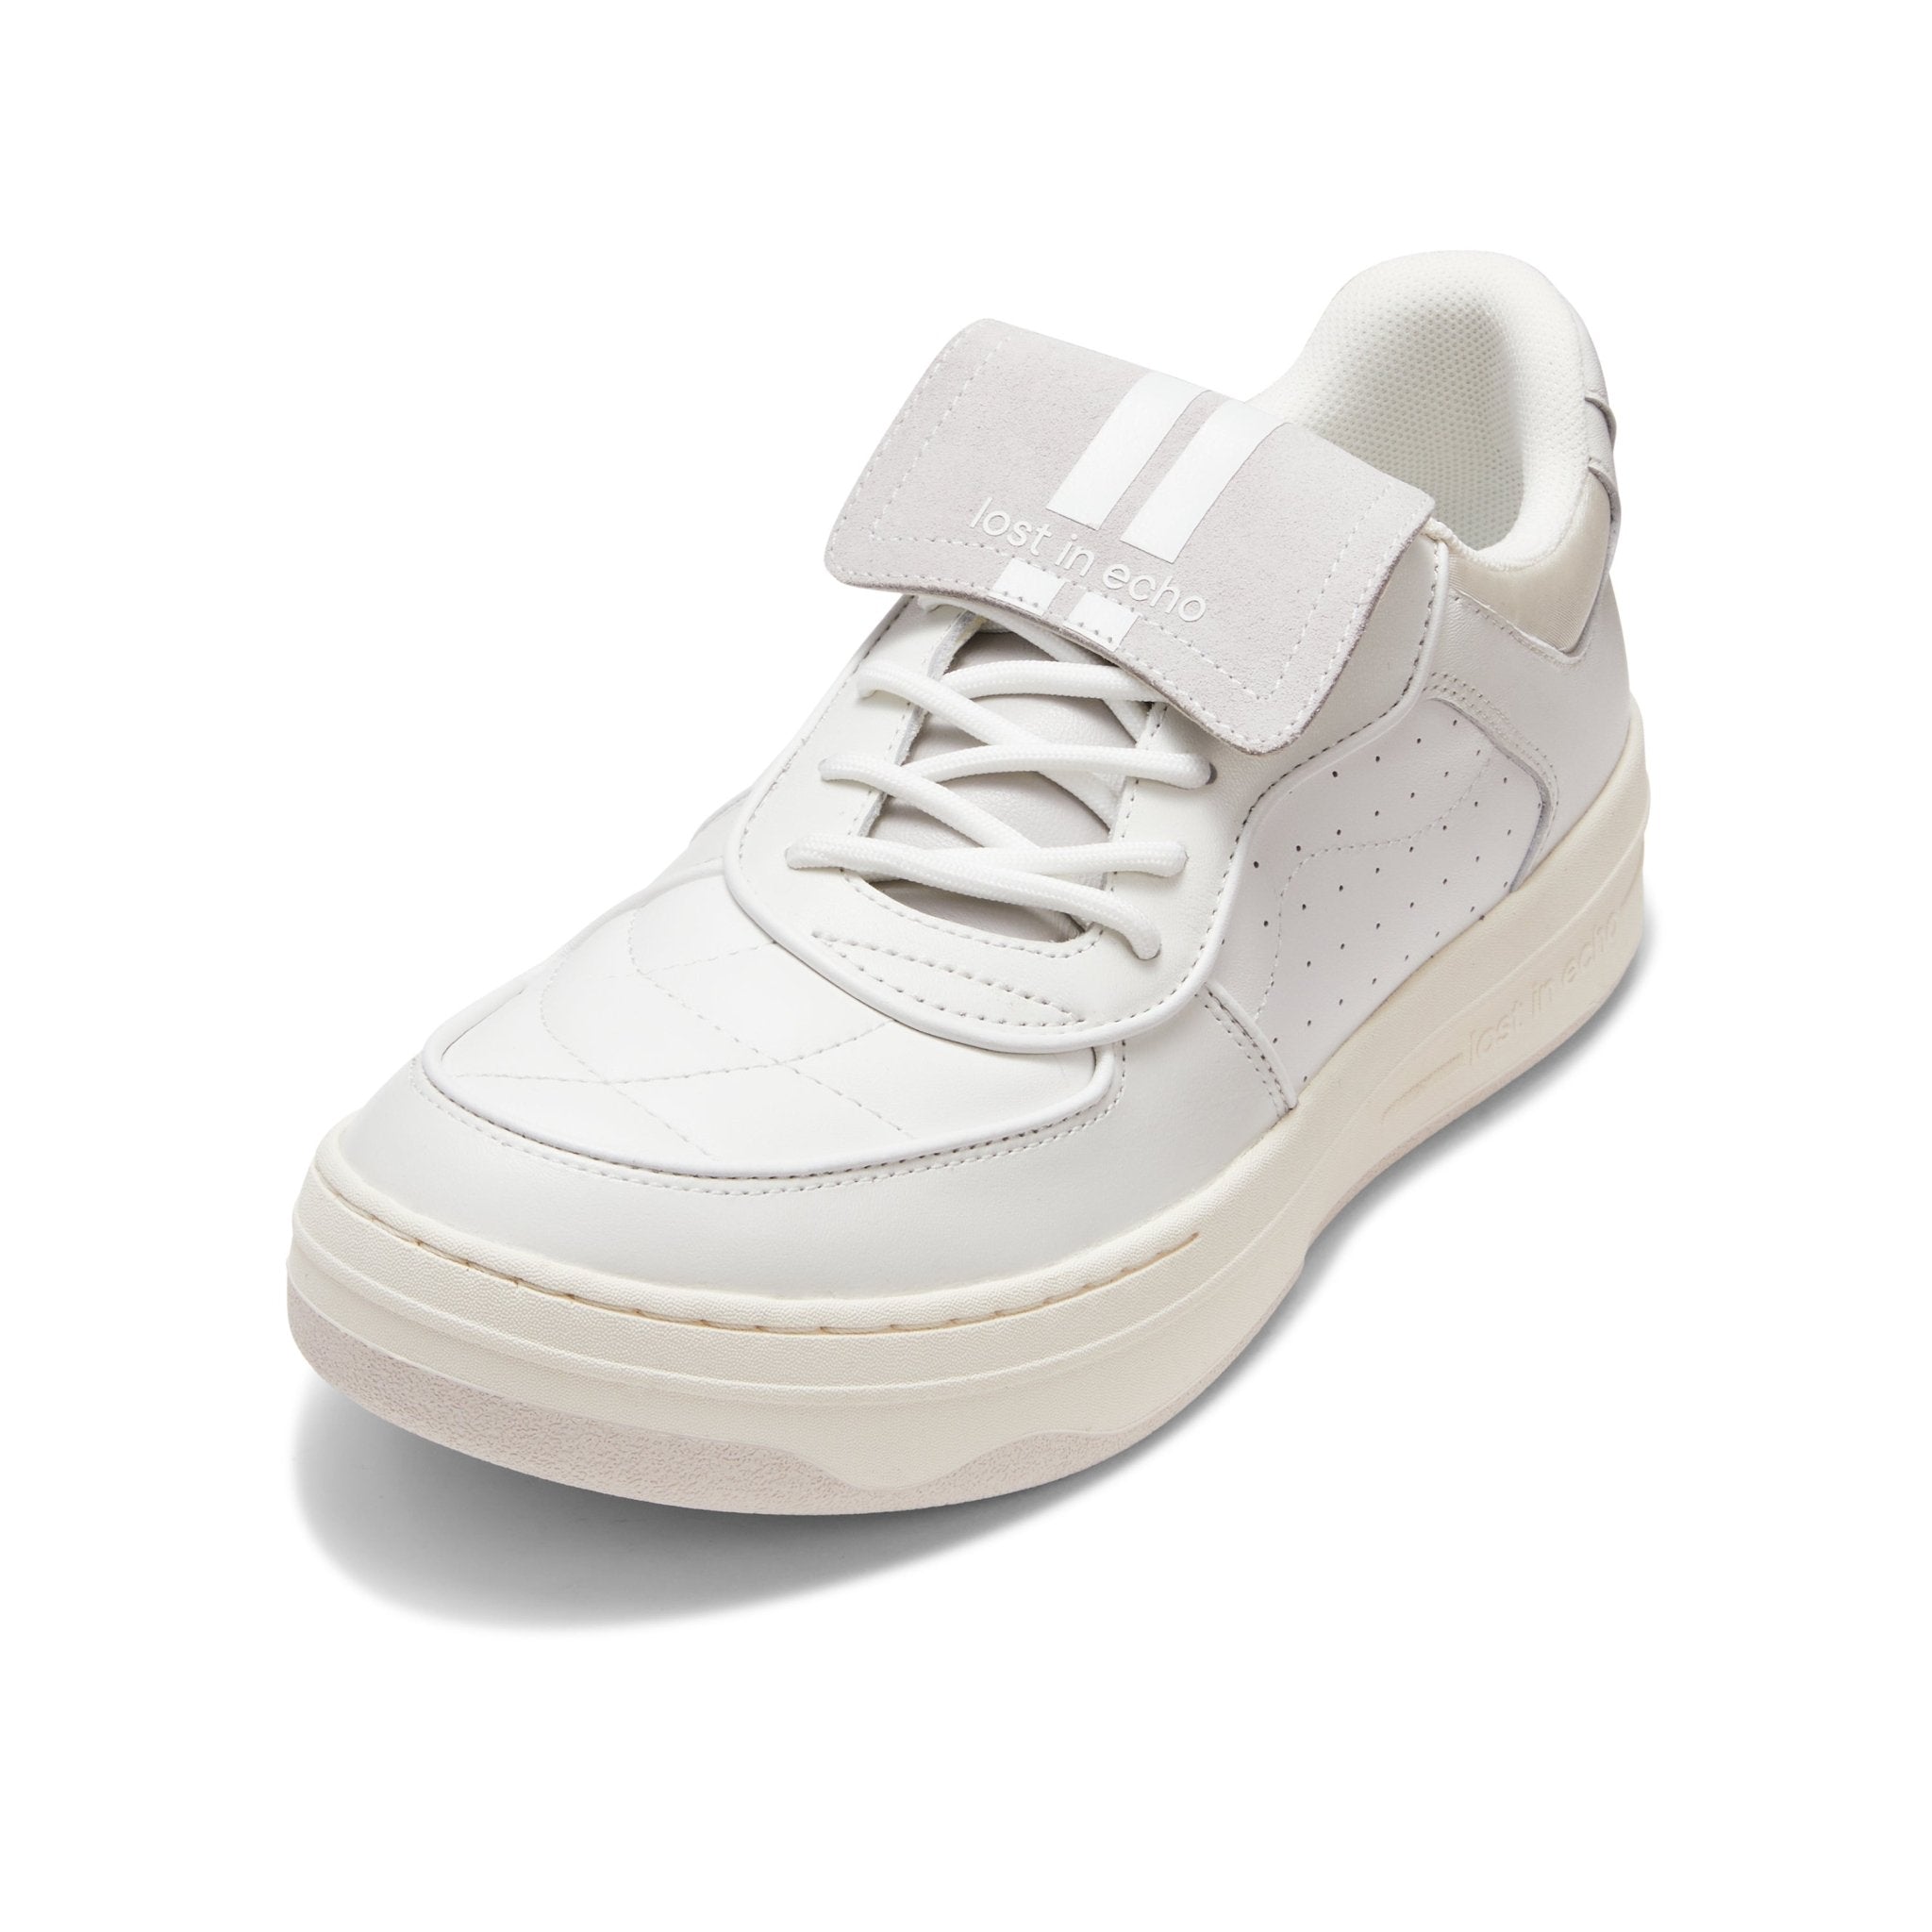 LOST IN ECHO White Thick Sole Skateboard Shoes | MADA IN CHINA